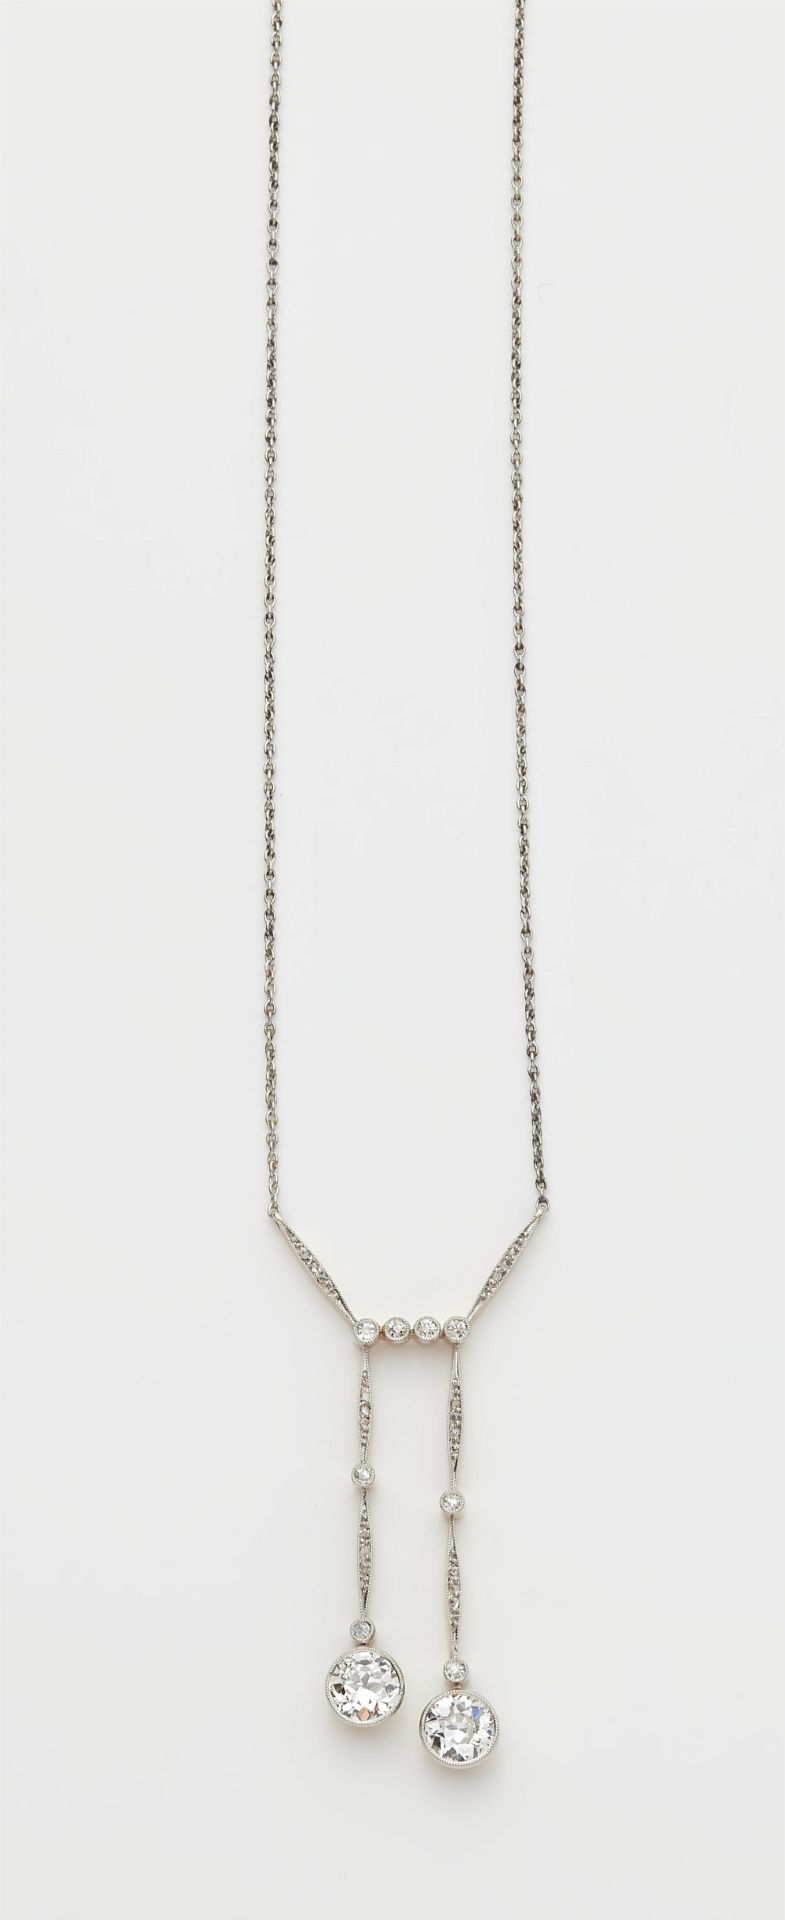 A 14k gold diamond negligé pendant necklace with two transitional-cut diamond solitaires.